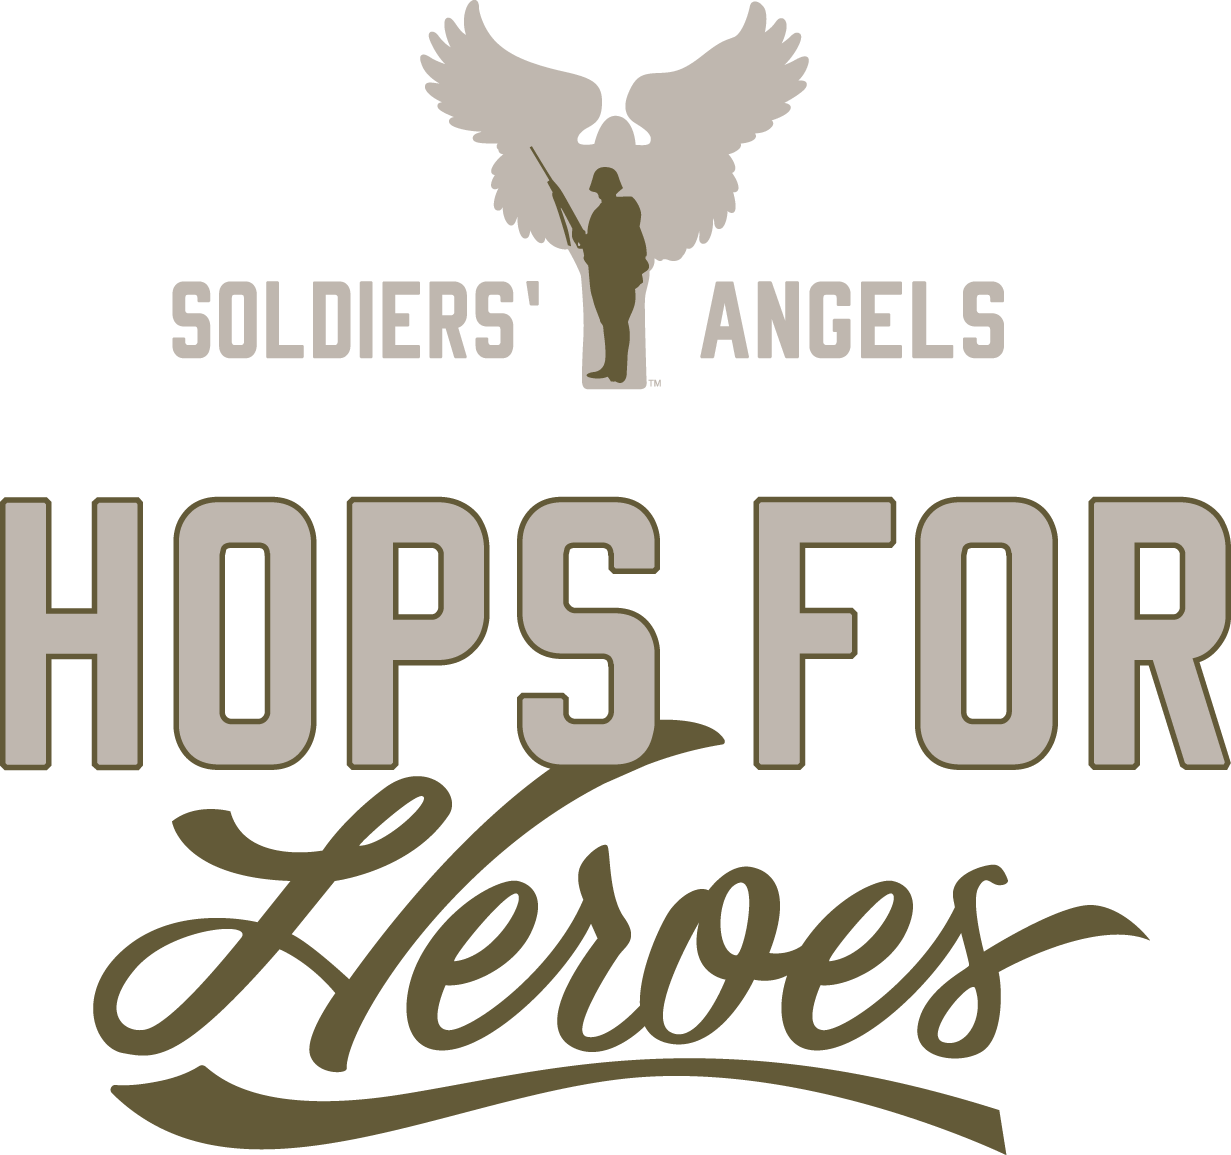 Soldiers' Angels Hops for Heroes - Soldiers' Angels